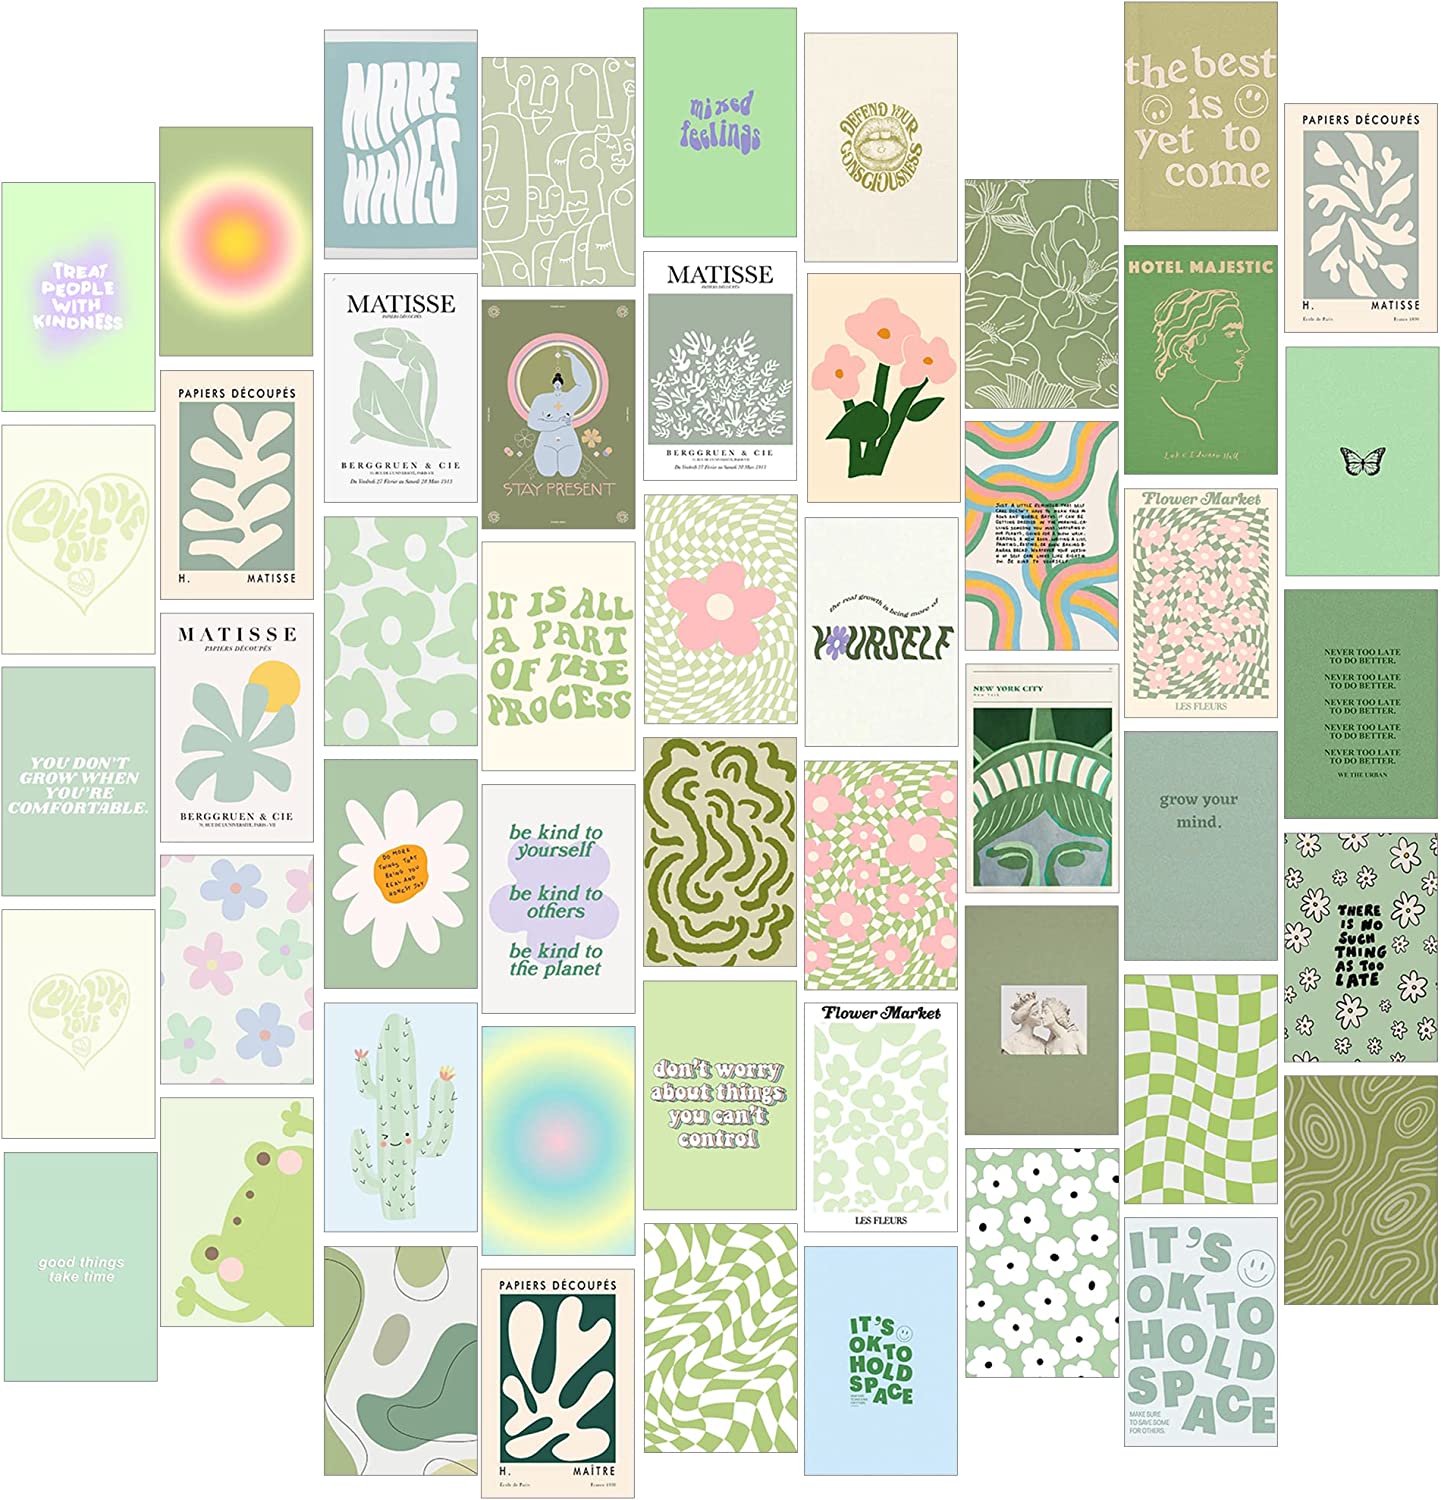 Buy Sage Green Room Decor Aesthetic, Danish Pastel Wall Collage Kit Aesthetic Picture, Sage Green Wall Decor for Bedroom, Preppy Room Decor for Teen Girls Bedroom, Danish Pastel Posters for Women Bedrooms